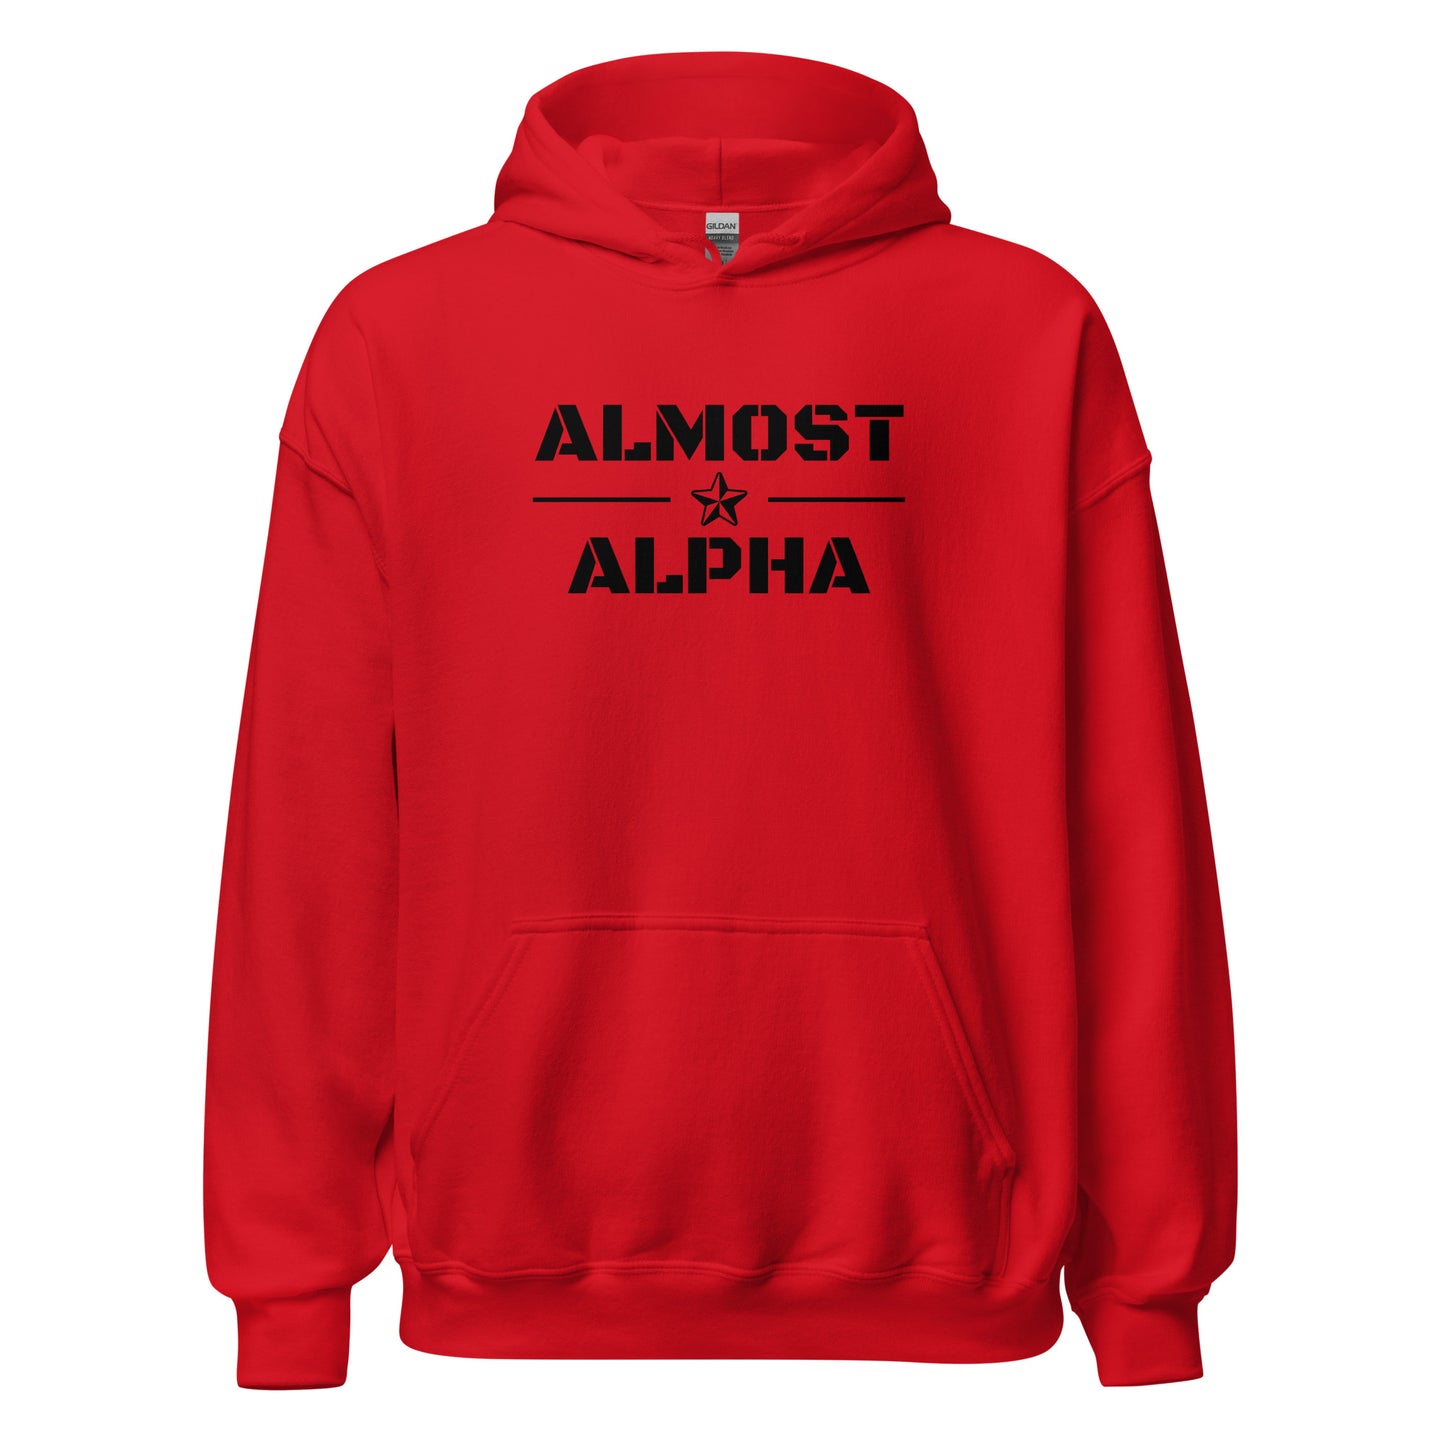 Almost Alpha Hoodie in Red